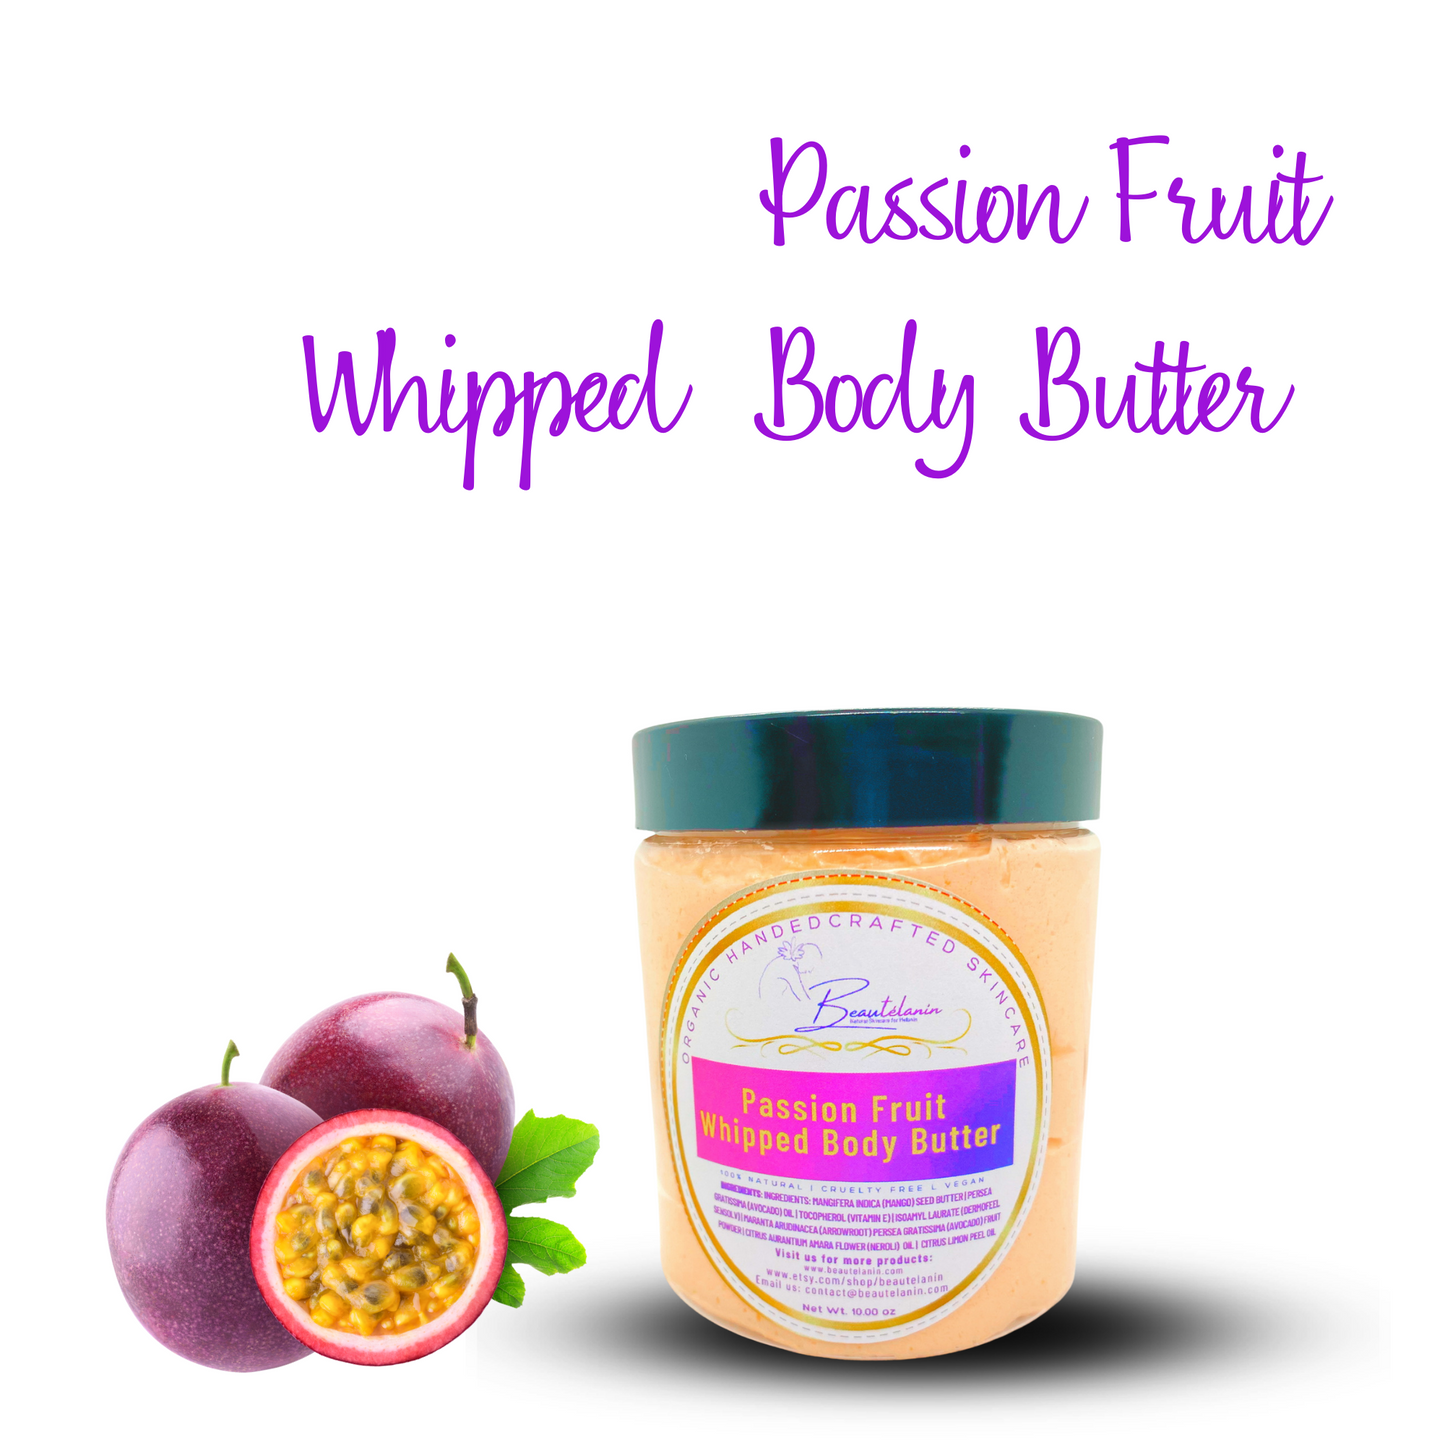 Organic Passion Fruit Whipped Body Butter